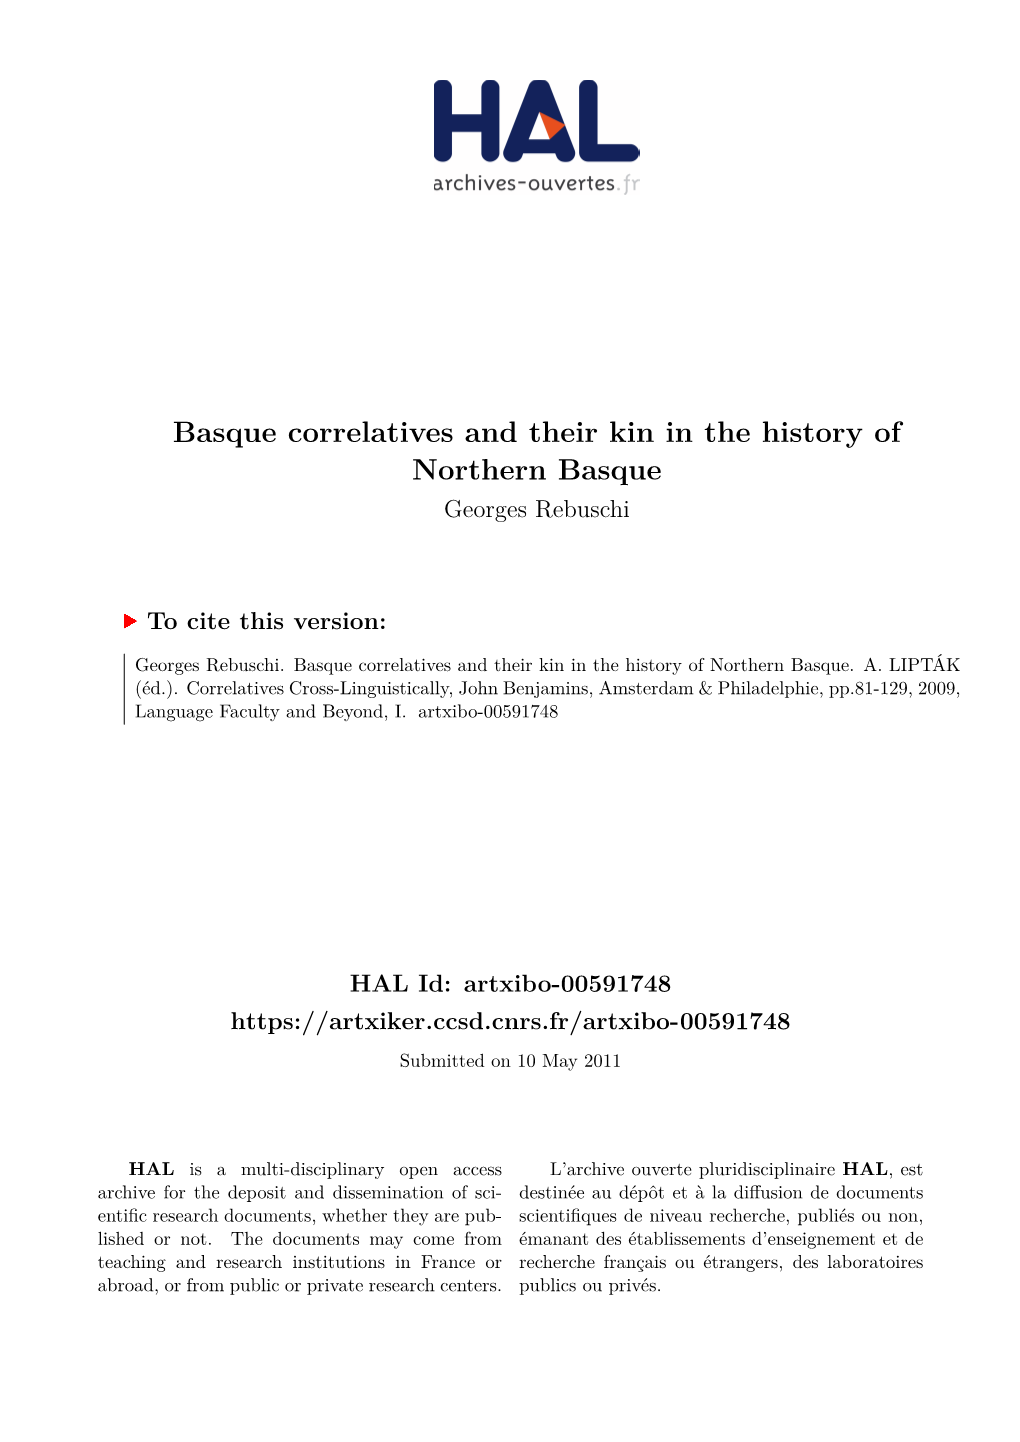 Basque Correlatives and Their Kin in the History of Northern Basque Georges Rebuschi